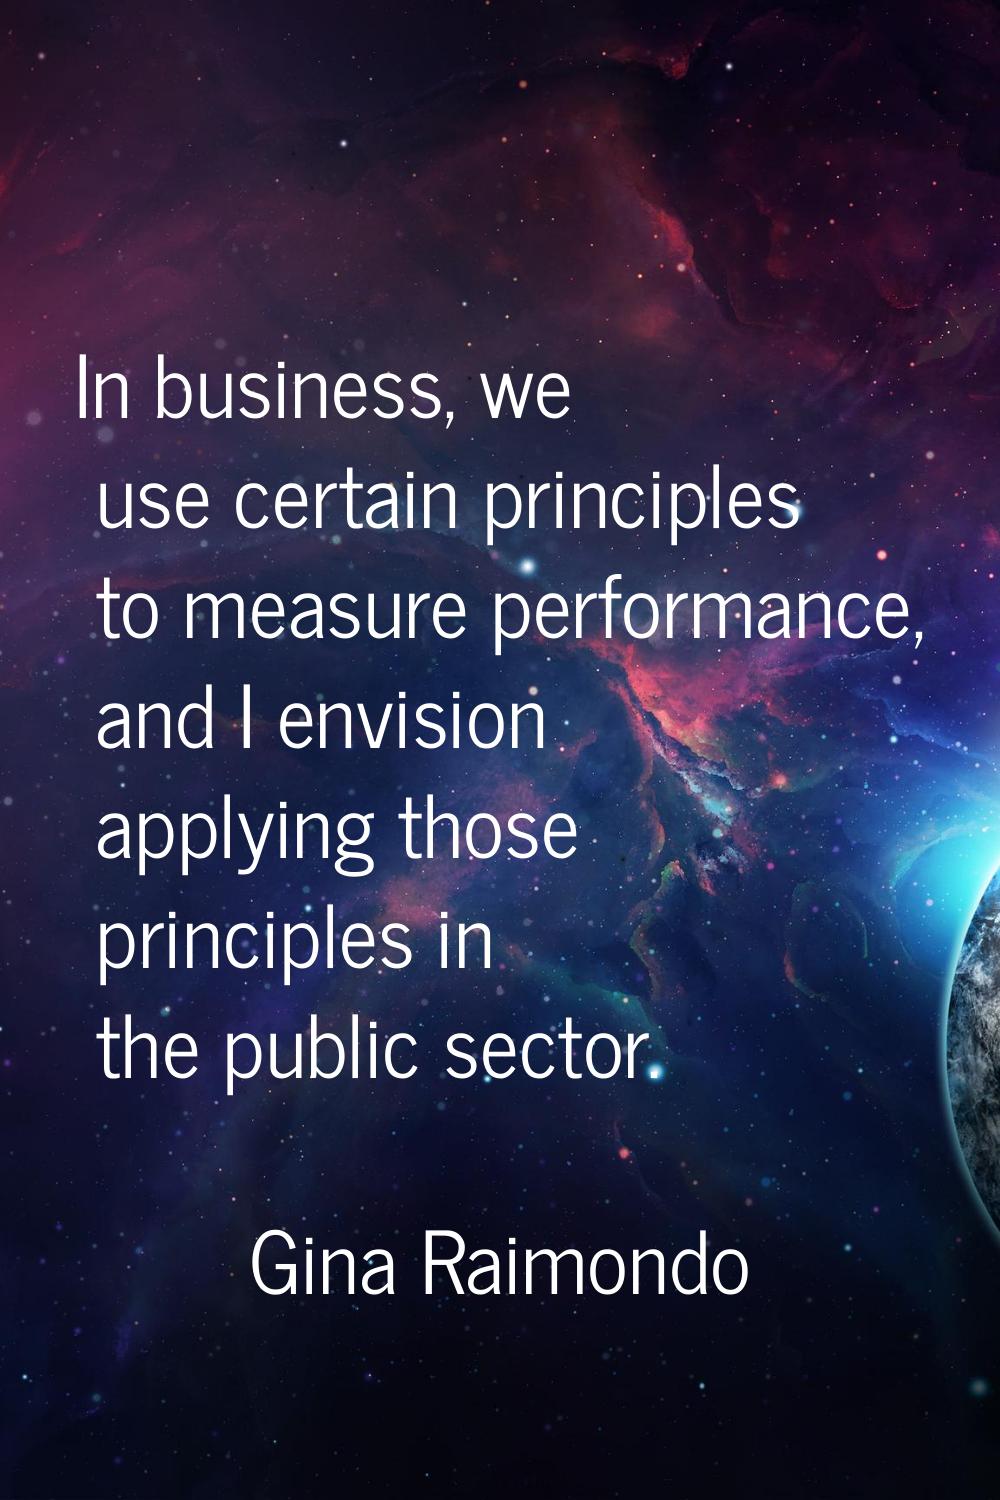 In business, we use certain principles to measure performance, and I envision applying those princi